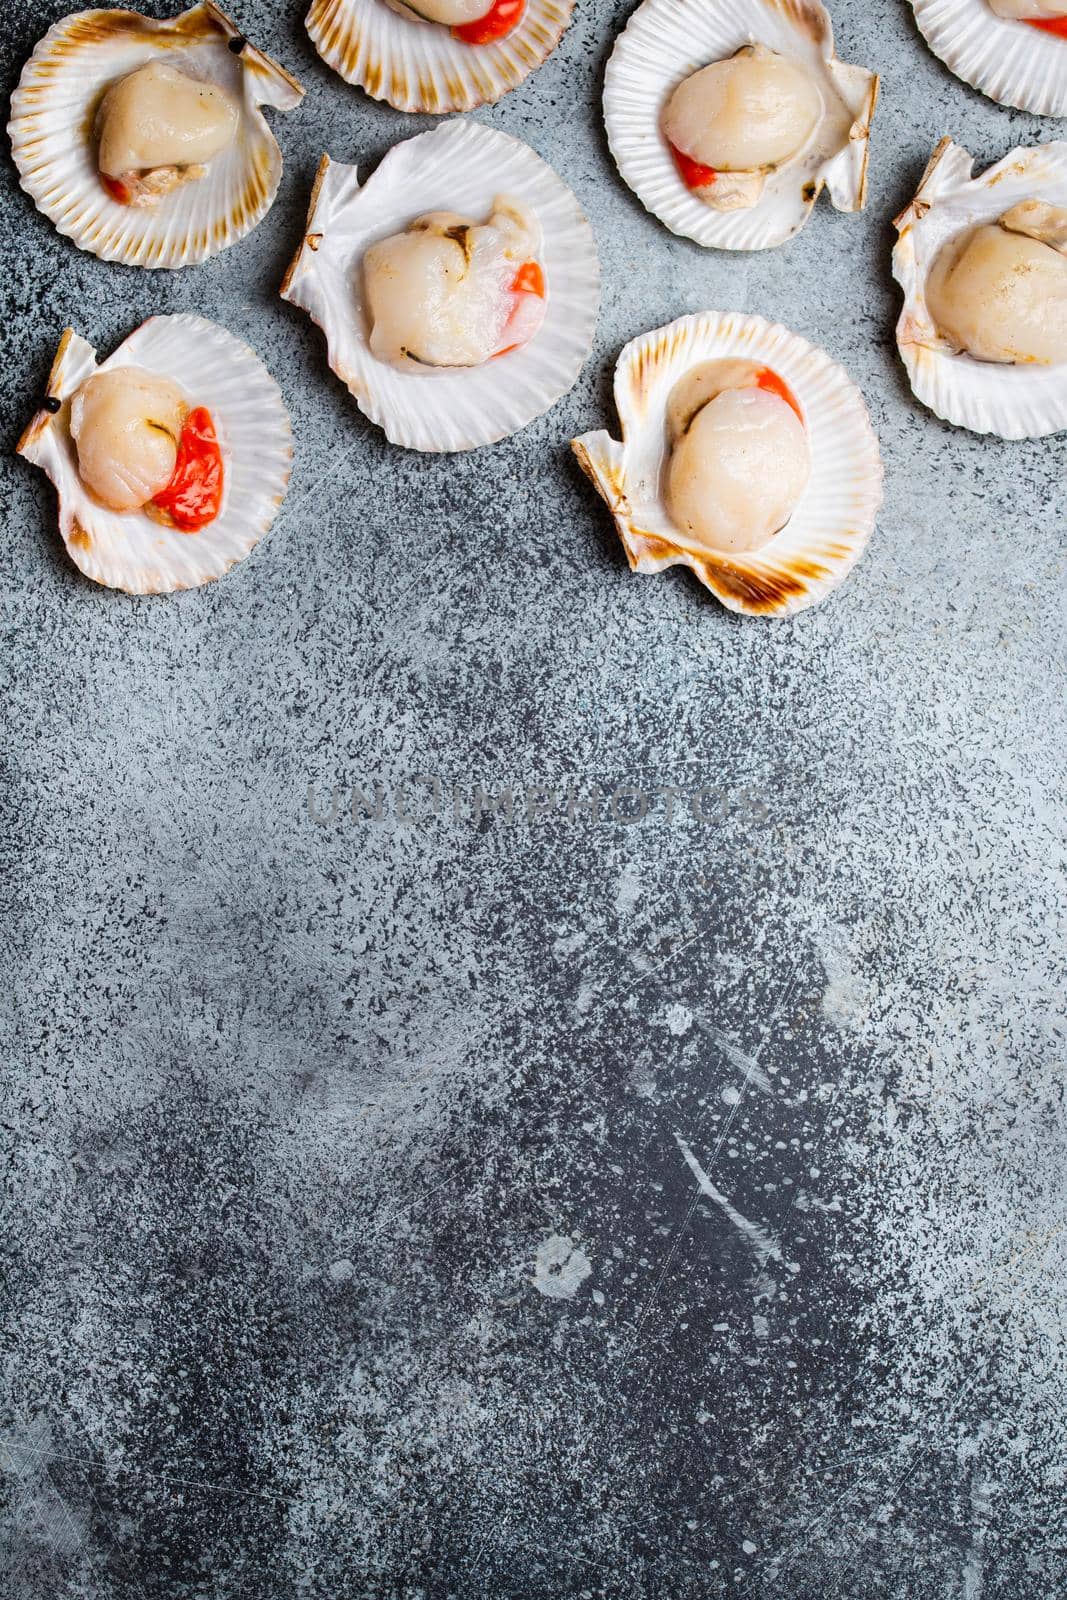 Raw fresh uncooked scallops in shells on grey rustic concrete background, top view, close-up. Seafood concept pattern, space for text